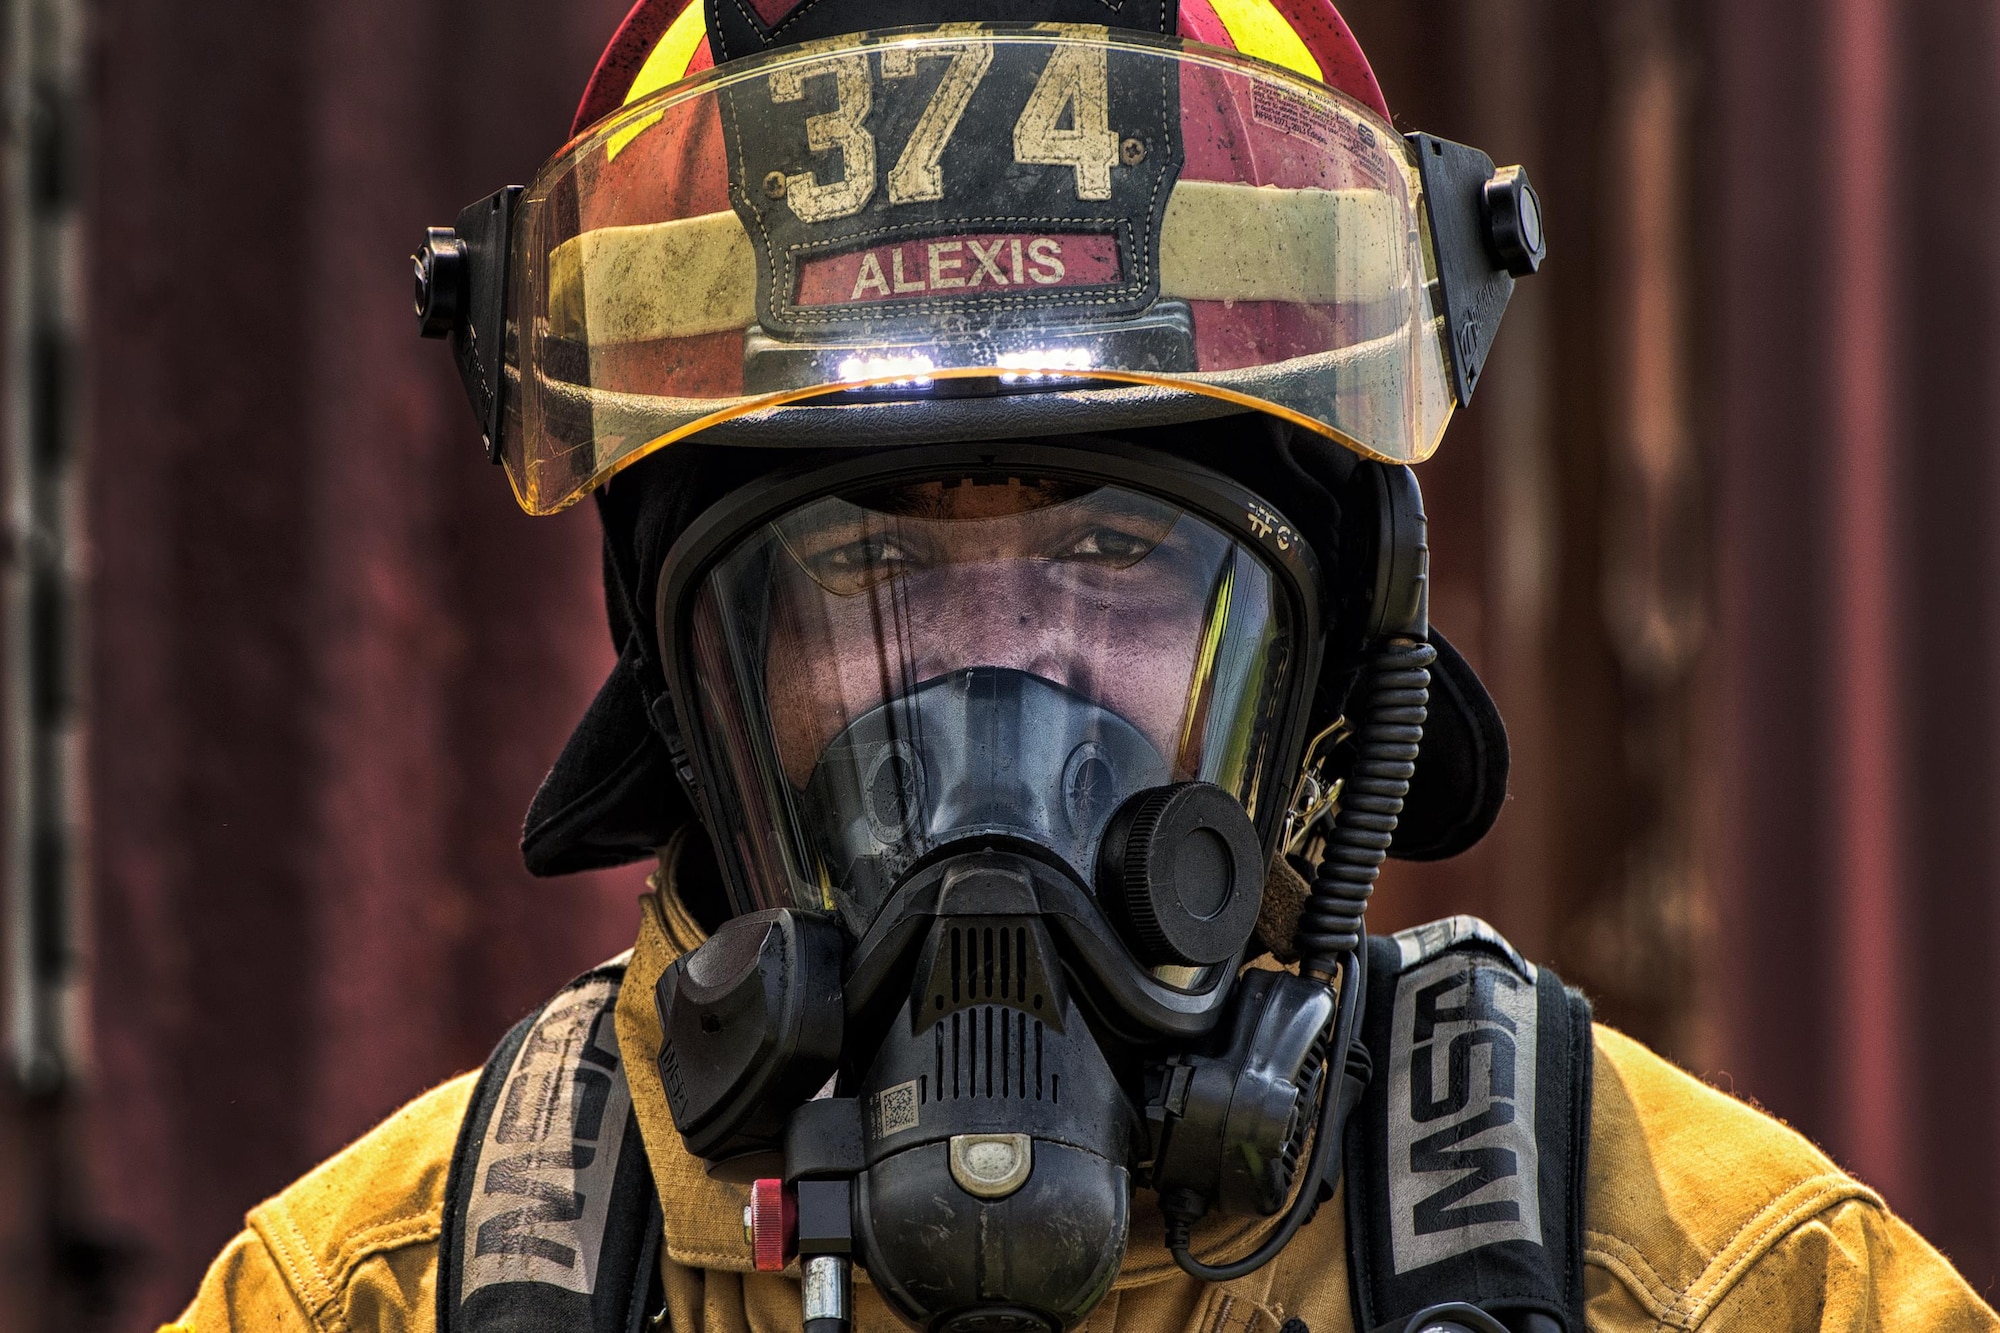 Staff Sgt. Trevor Alexis, the 374th Civil Engineer Squadron fire protection NCO in charge of training, waits to enter a flashover trainer Aug. 4, 2015, at Yokota Air Base, Japan. Flashover, a near-simultaneous ignition of many objects in a confined room, creates a dangerous situation where both heat and smoke continue to increase until combustion. Simulating a flashover fire in a confined room with limited ventilation enables a trainer to educate and prepare firefighters to recognize and react to a potentially dangerous situation. (U.S. Air Force photo/Airman 1st Class Delano Scott)